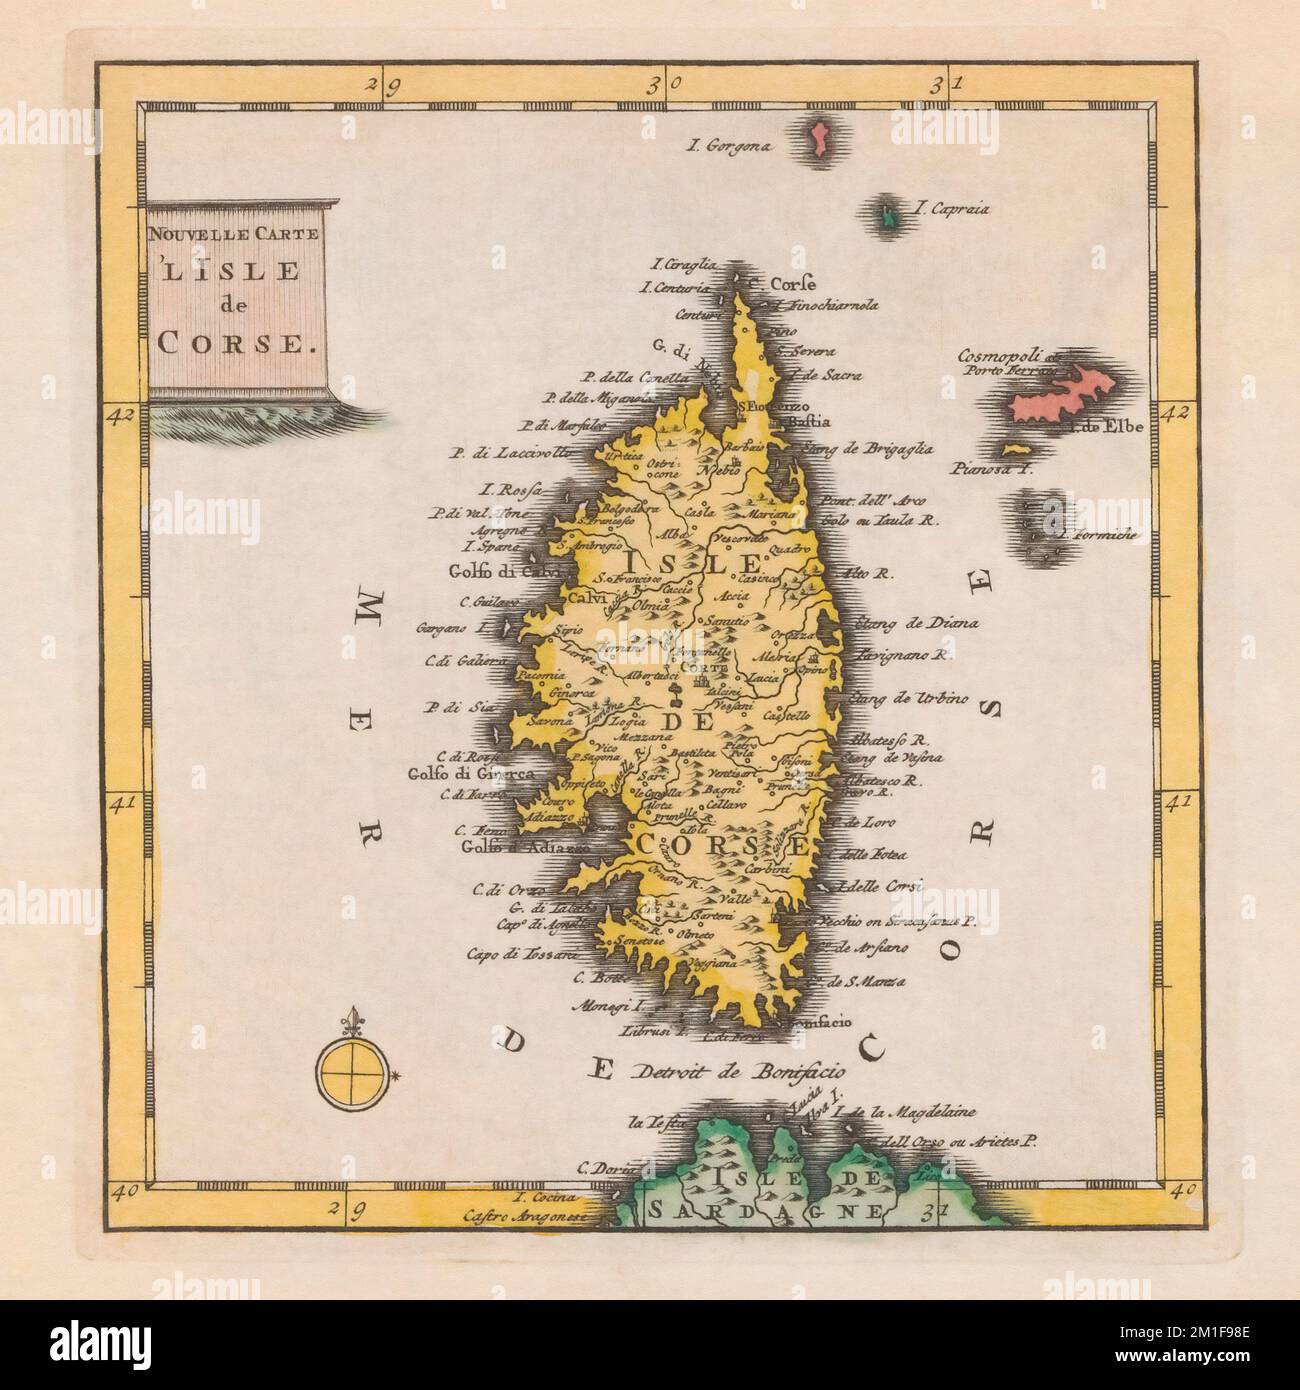 Map of Corsica, France dated 1735.  By an unidentified cartographer. Stock Photo